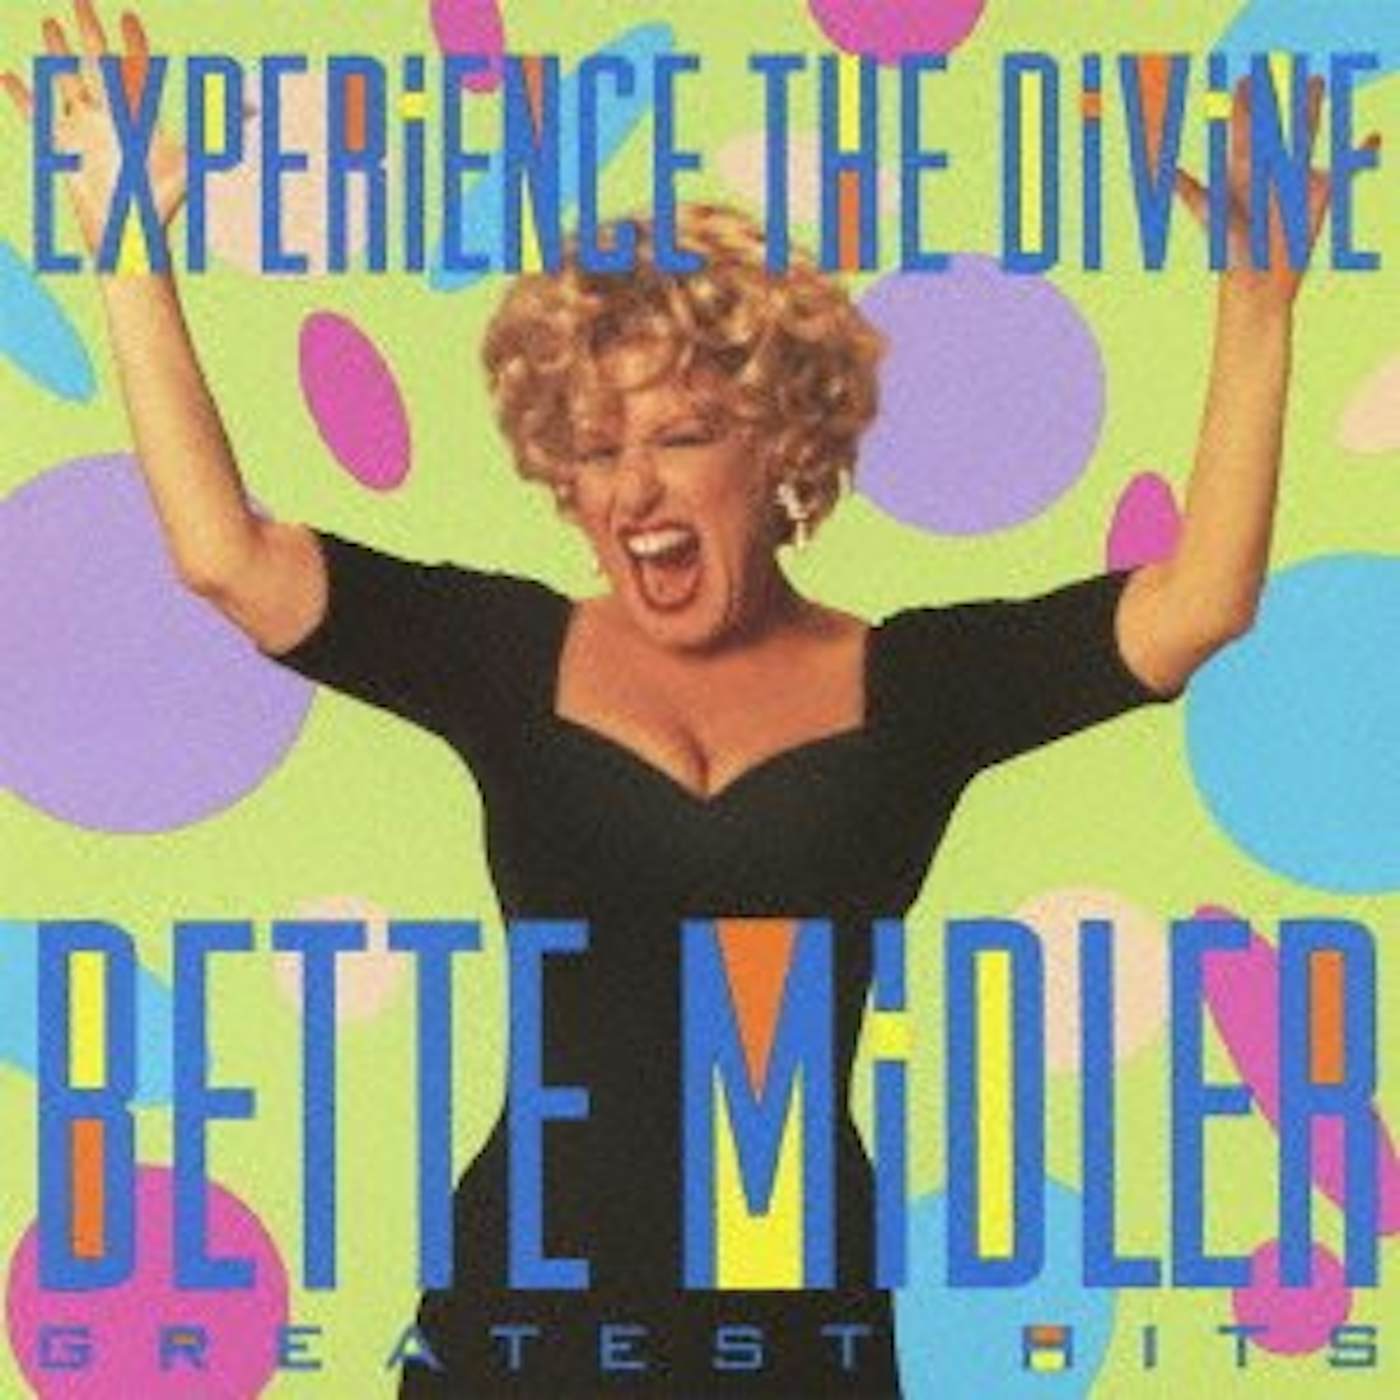 EXPERIENCE THE DIVINE BETTE MIDLER CD